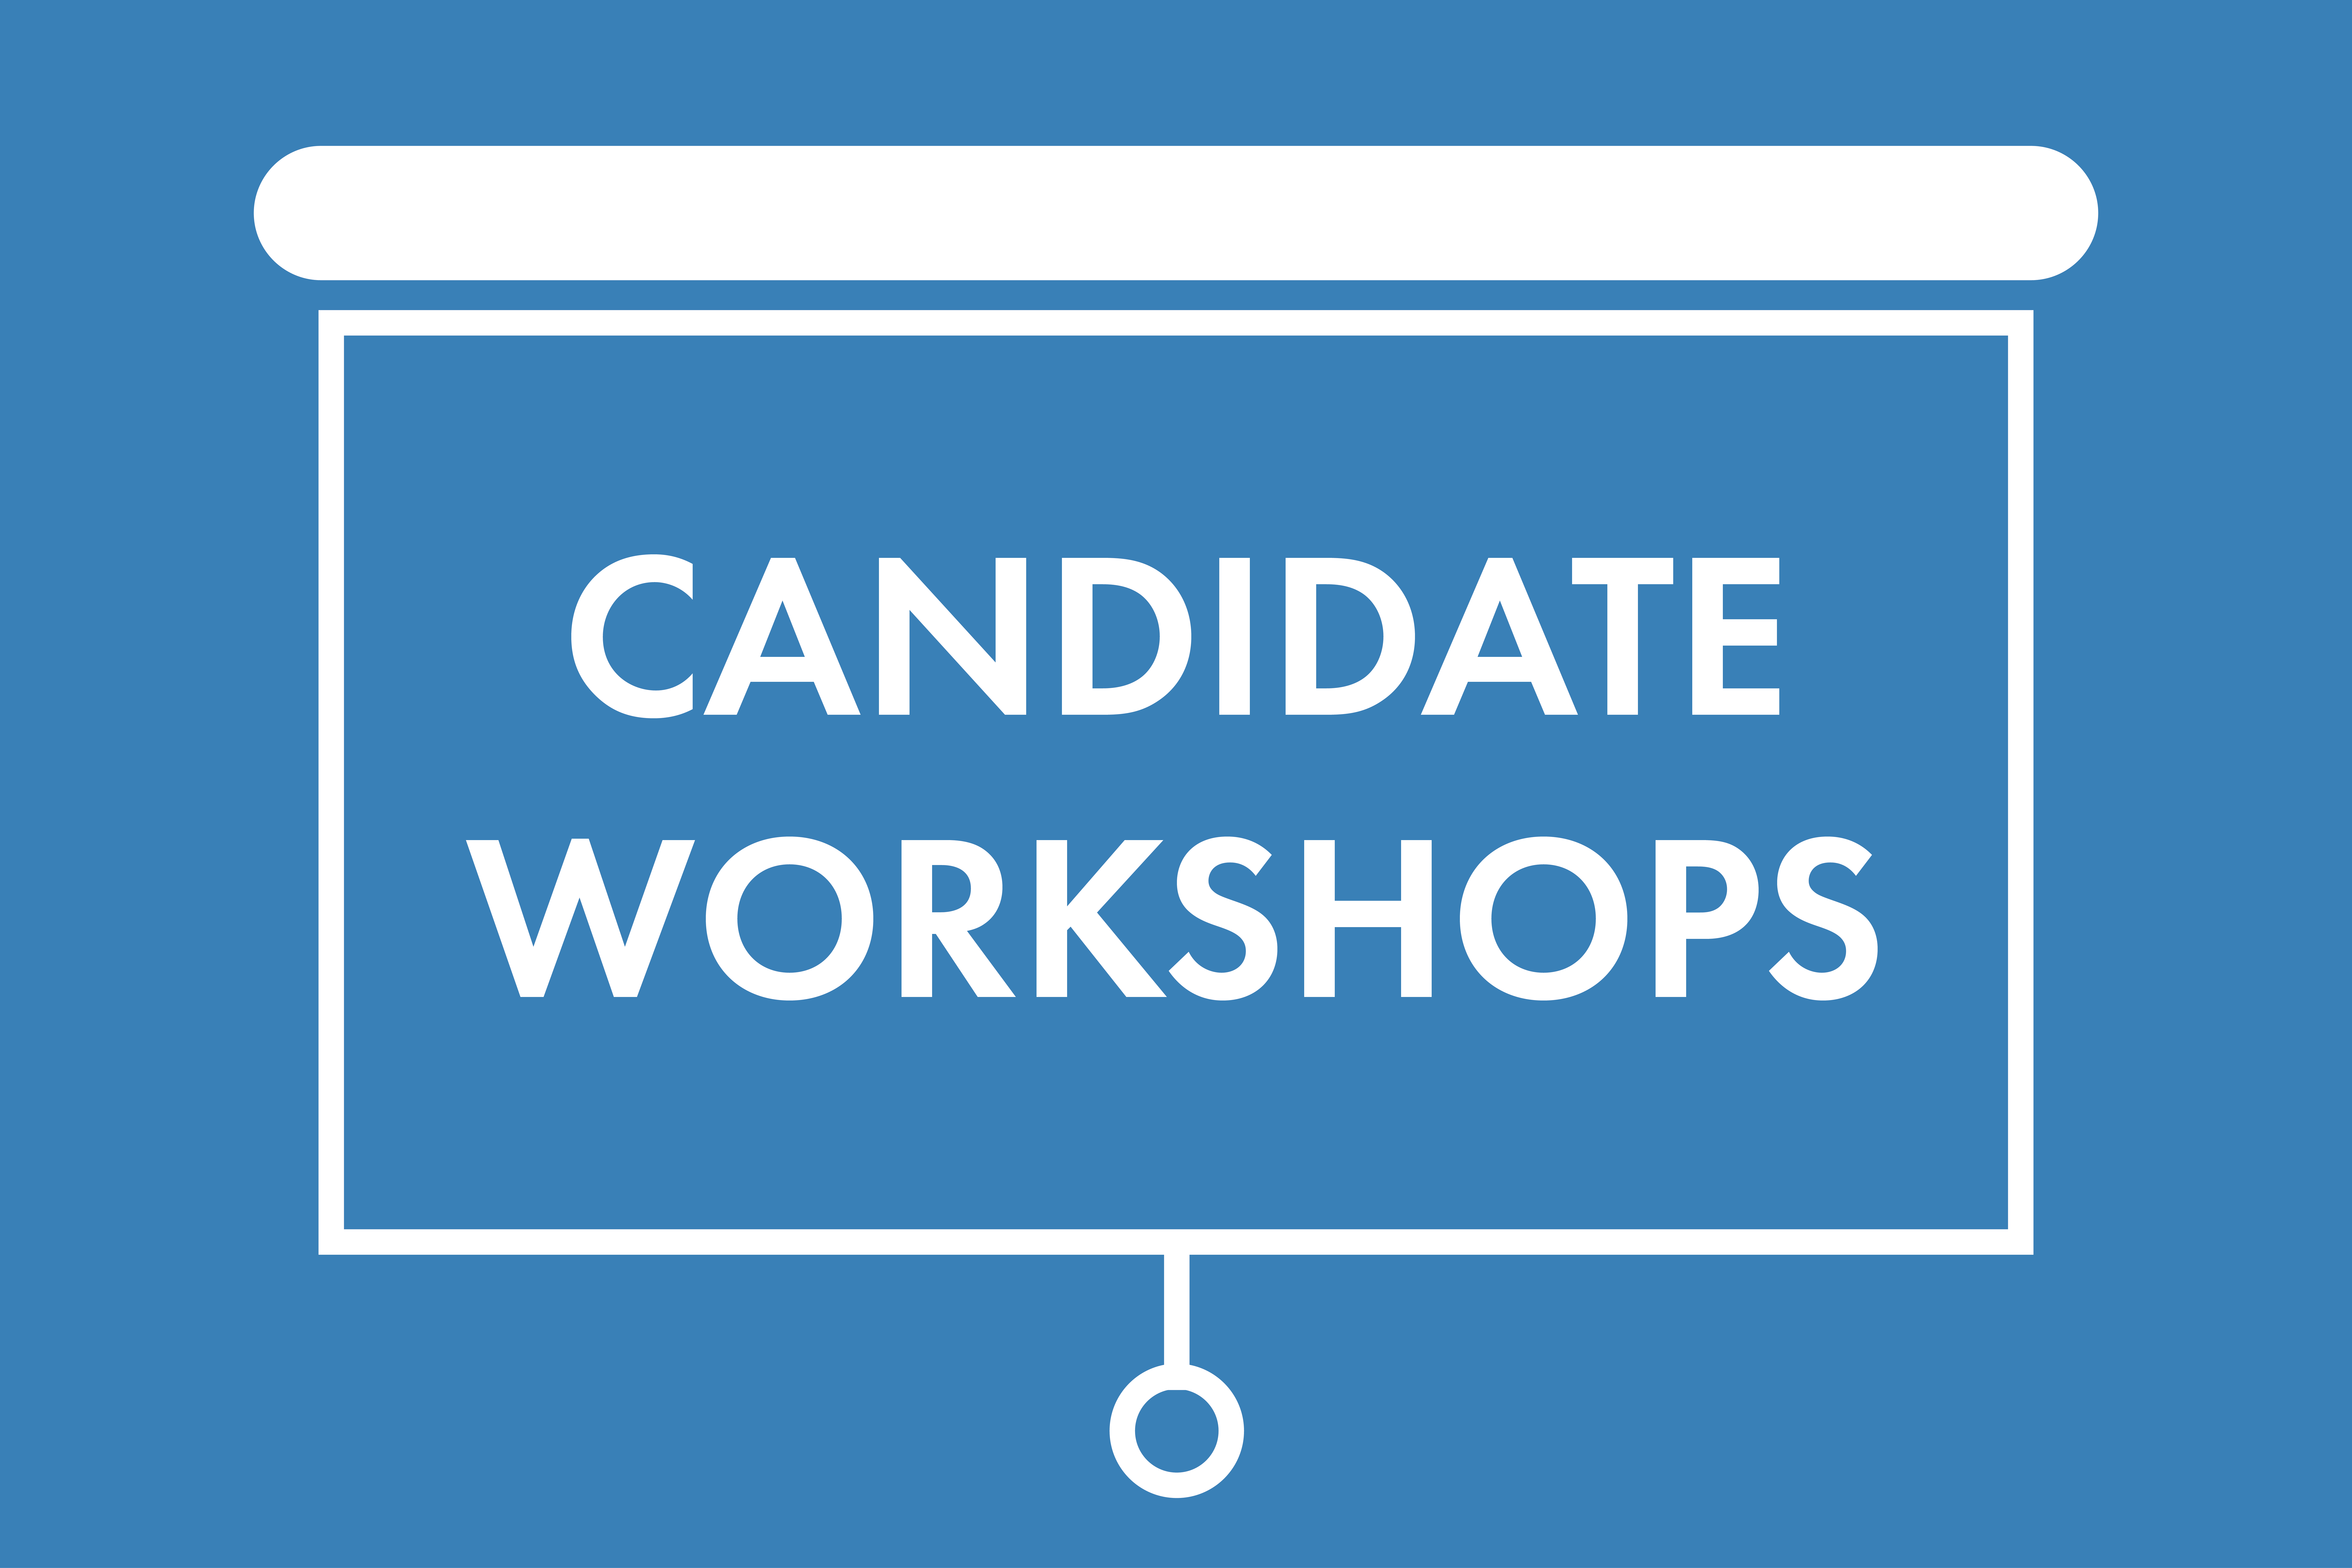 candidate workshops for the 2019 Neighborhood Council elections